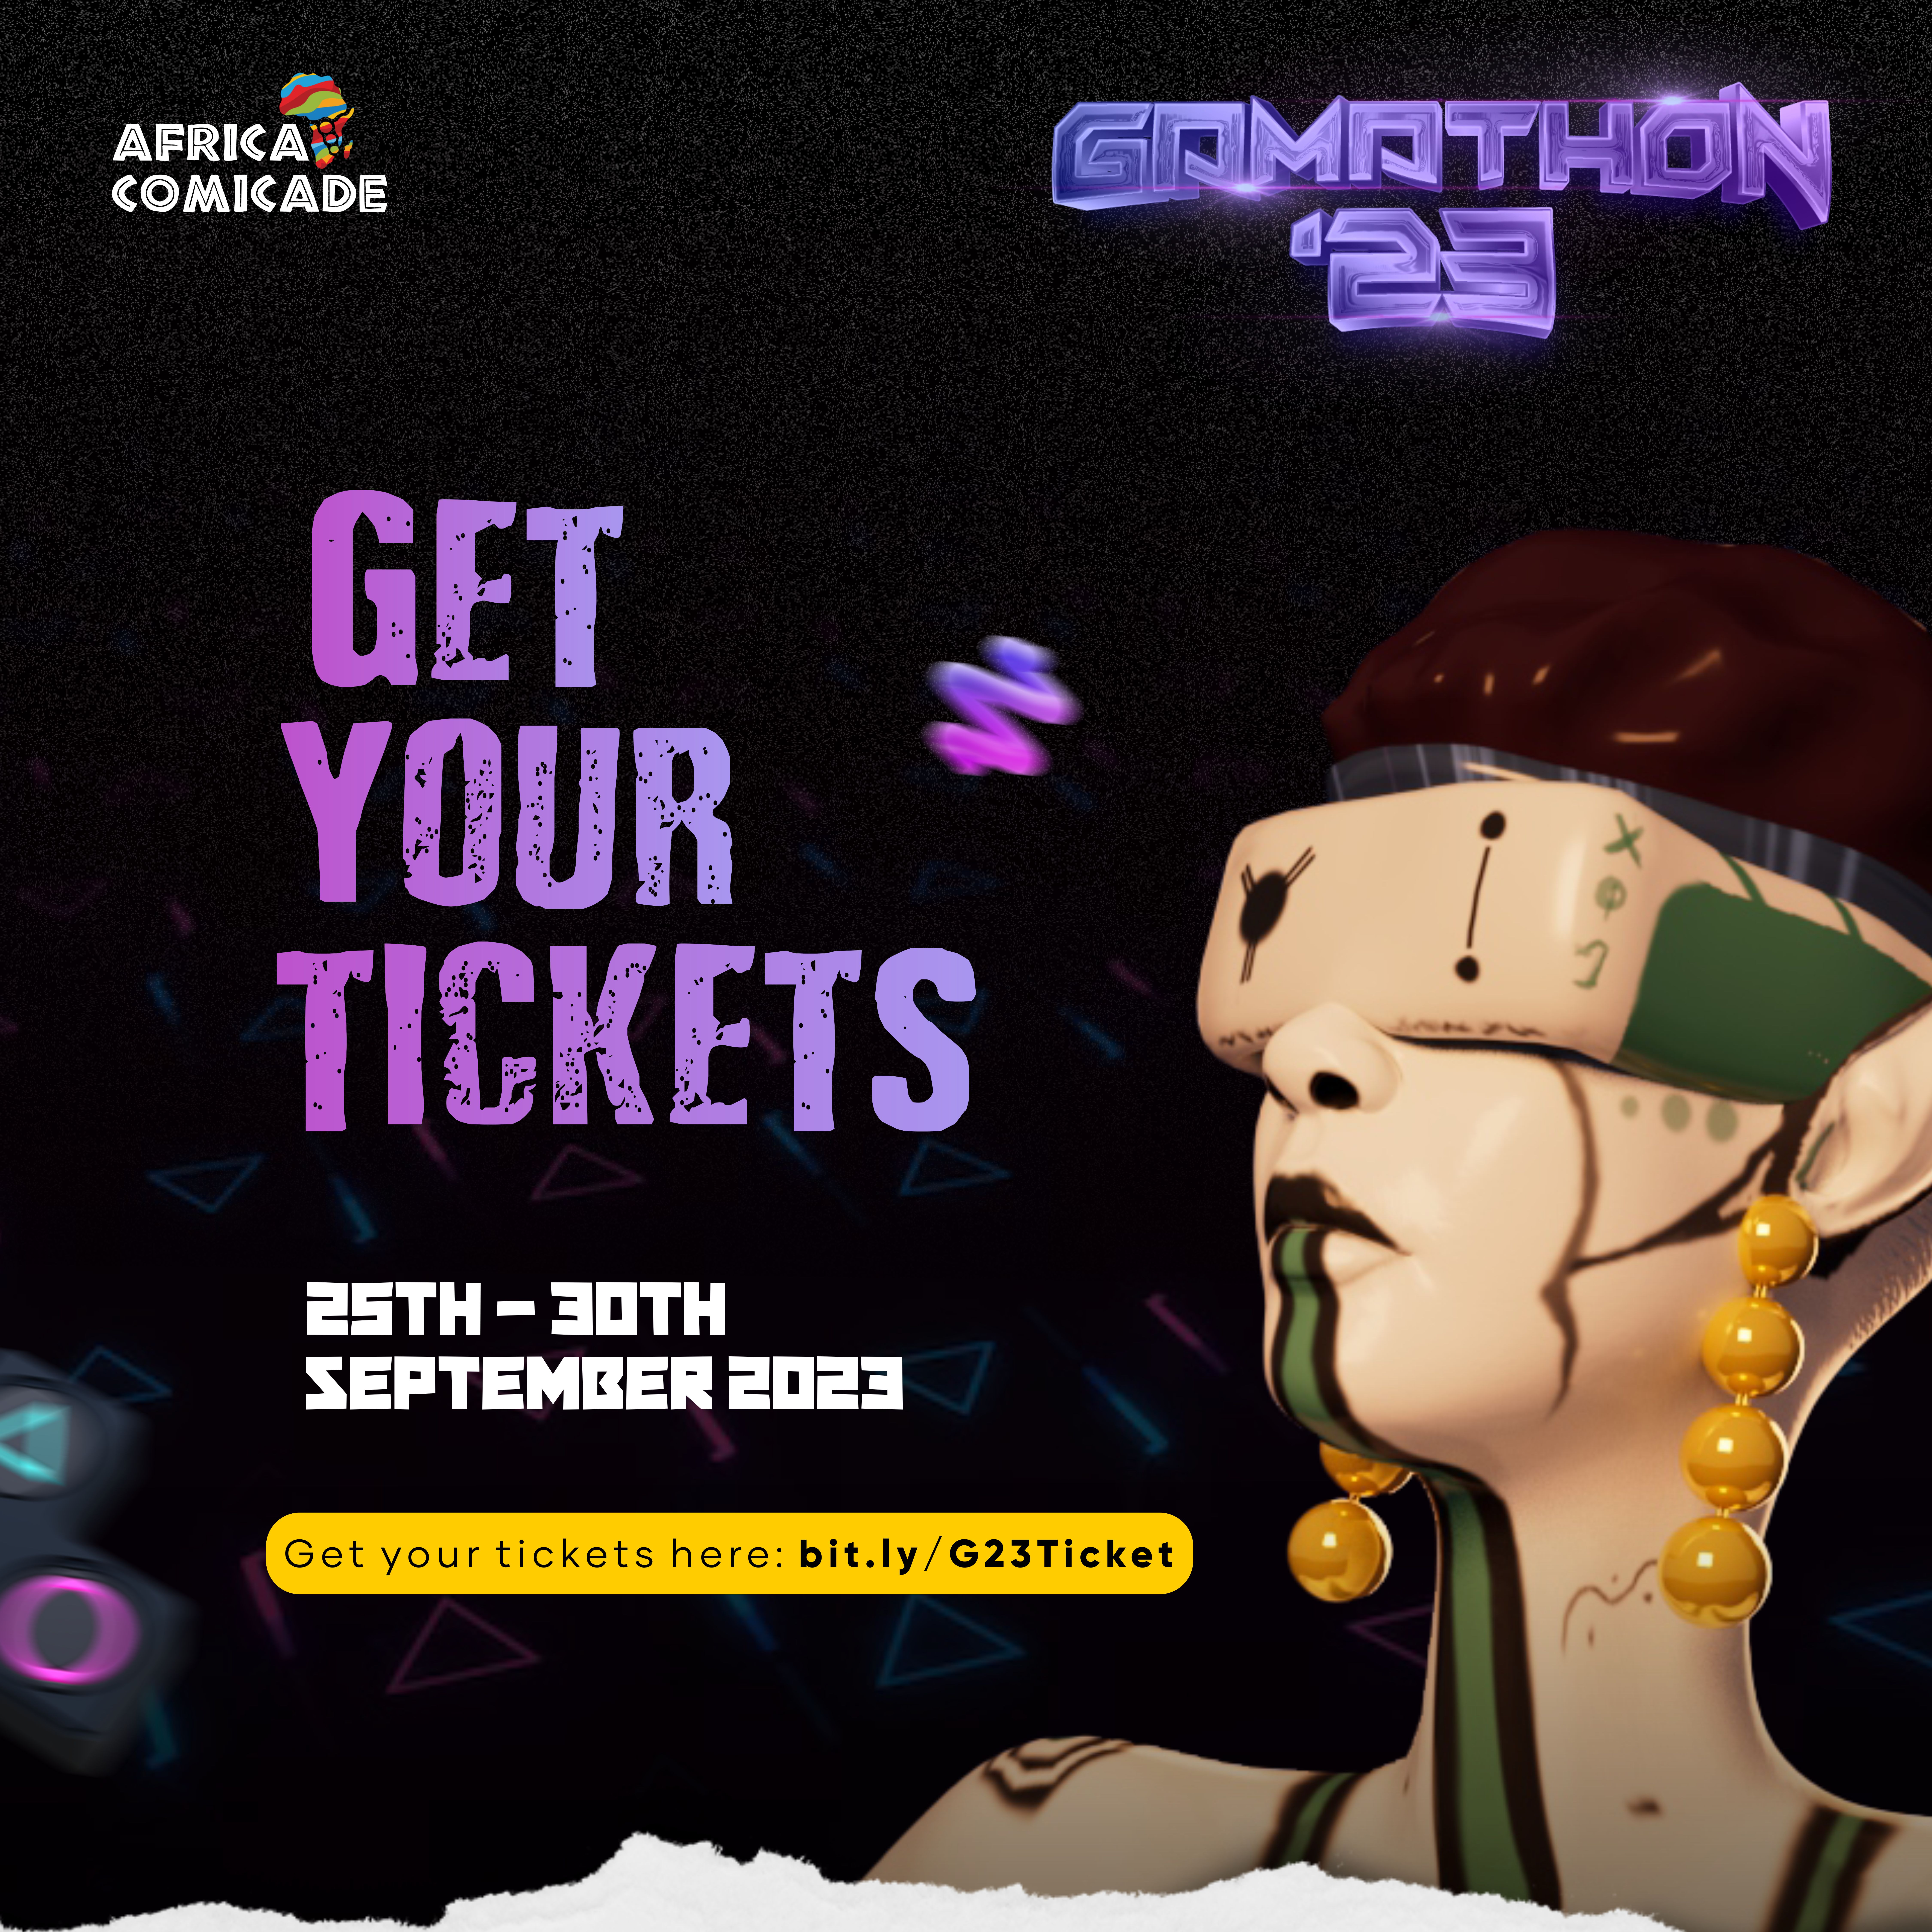 AfricaComicade's  Gamathon returns to spark the creative and interactive media industry